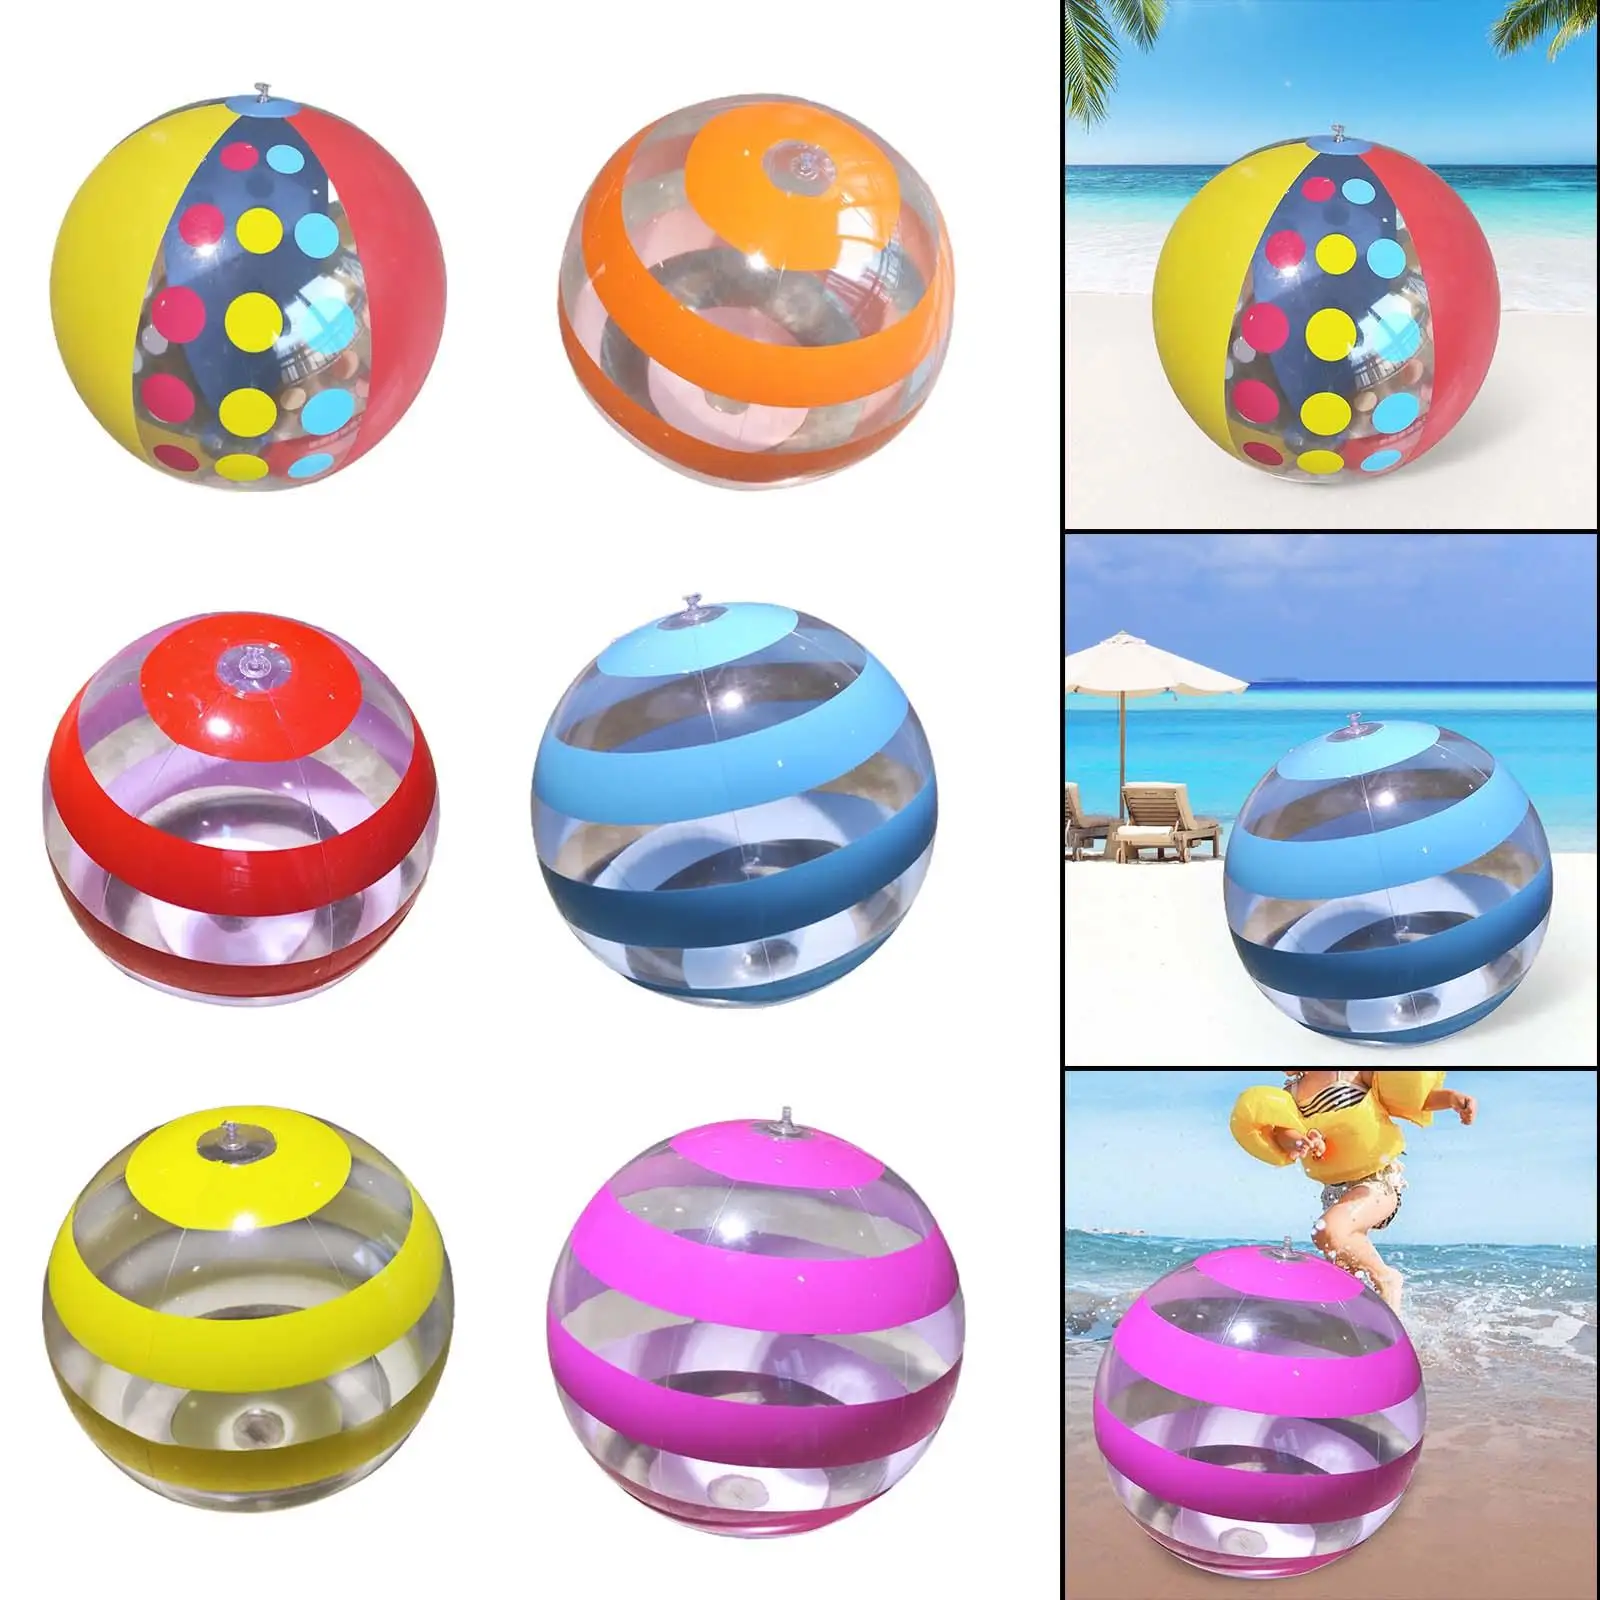 Swimming Pool Balls Multipurpose PVC Party Favor Pool Game Summer Water Games Blow Balls for Lake Pool Party Holiday